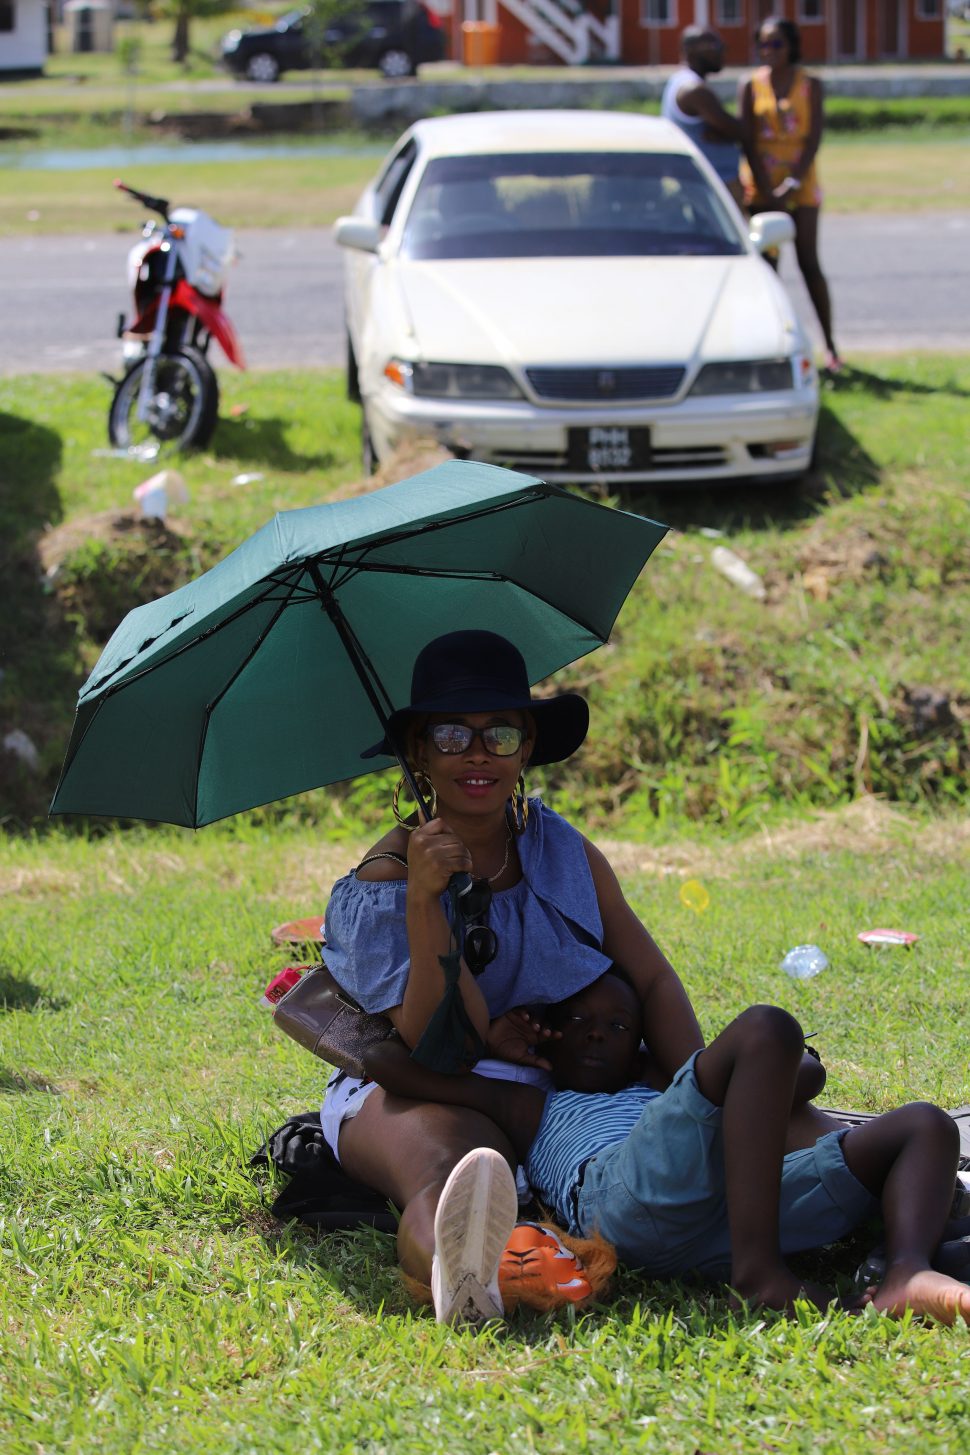 A mother sheltering her child from the blistering sun as they witnessed the Mash parade on Saturday.